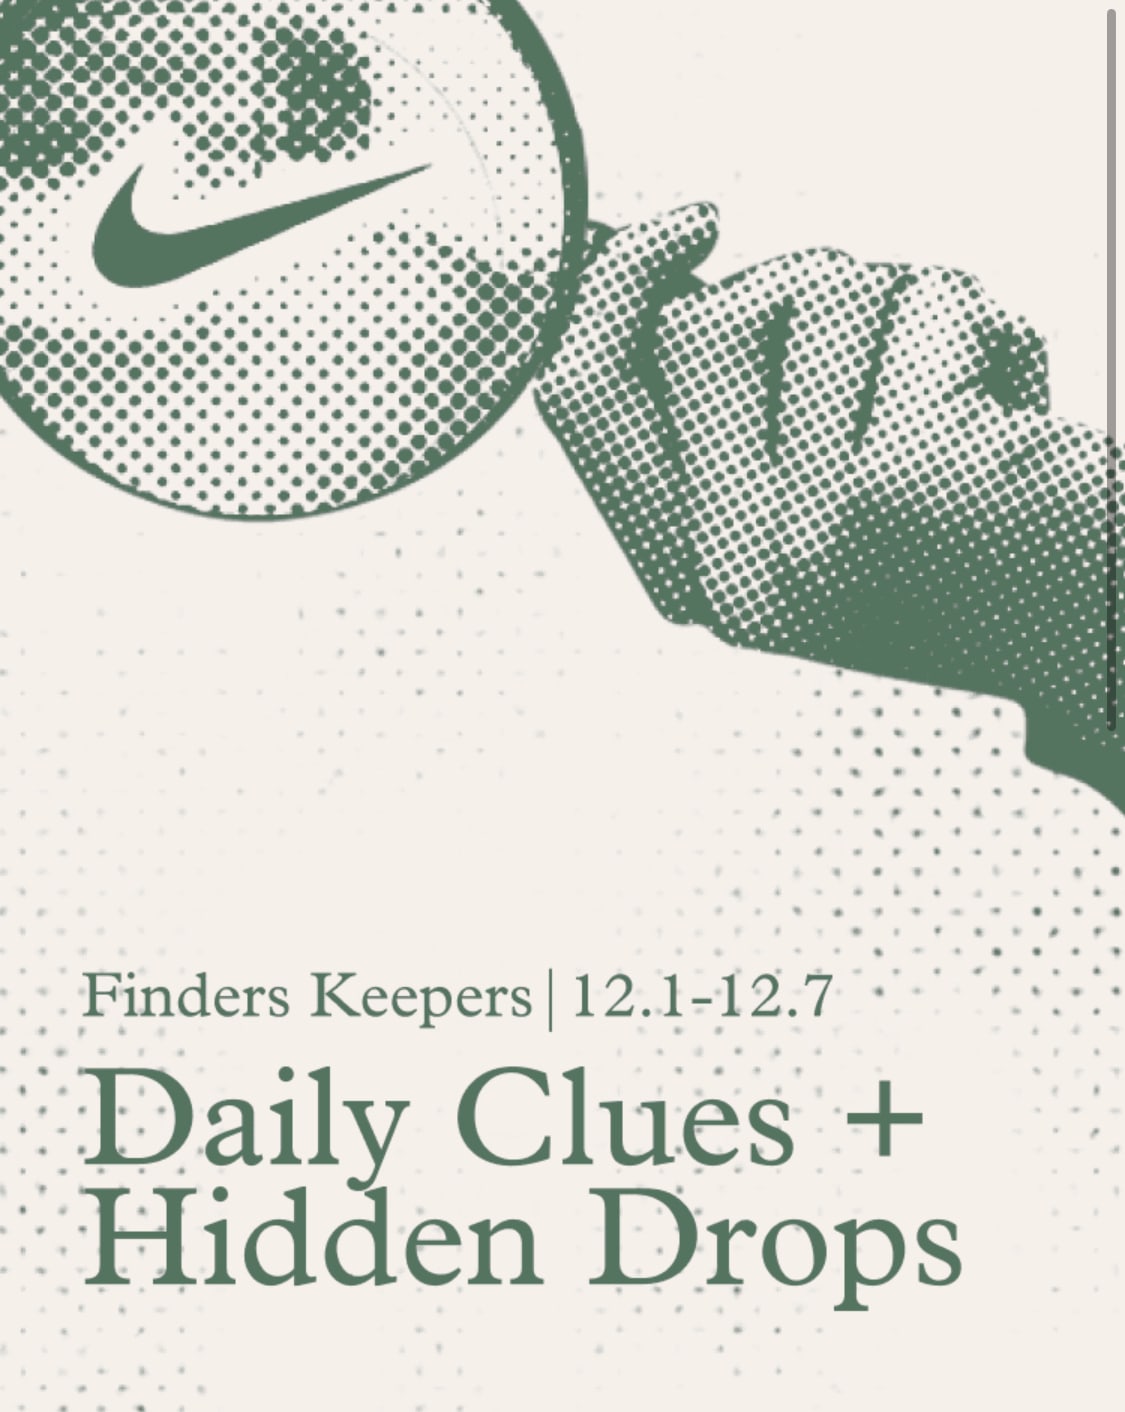 Nike Finders Keepers Event Banner